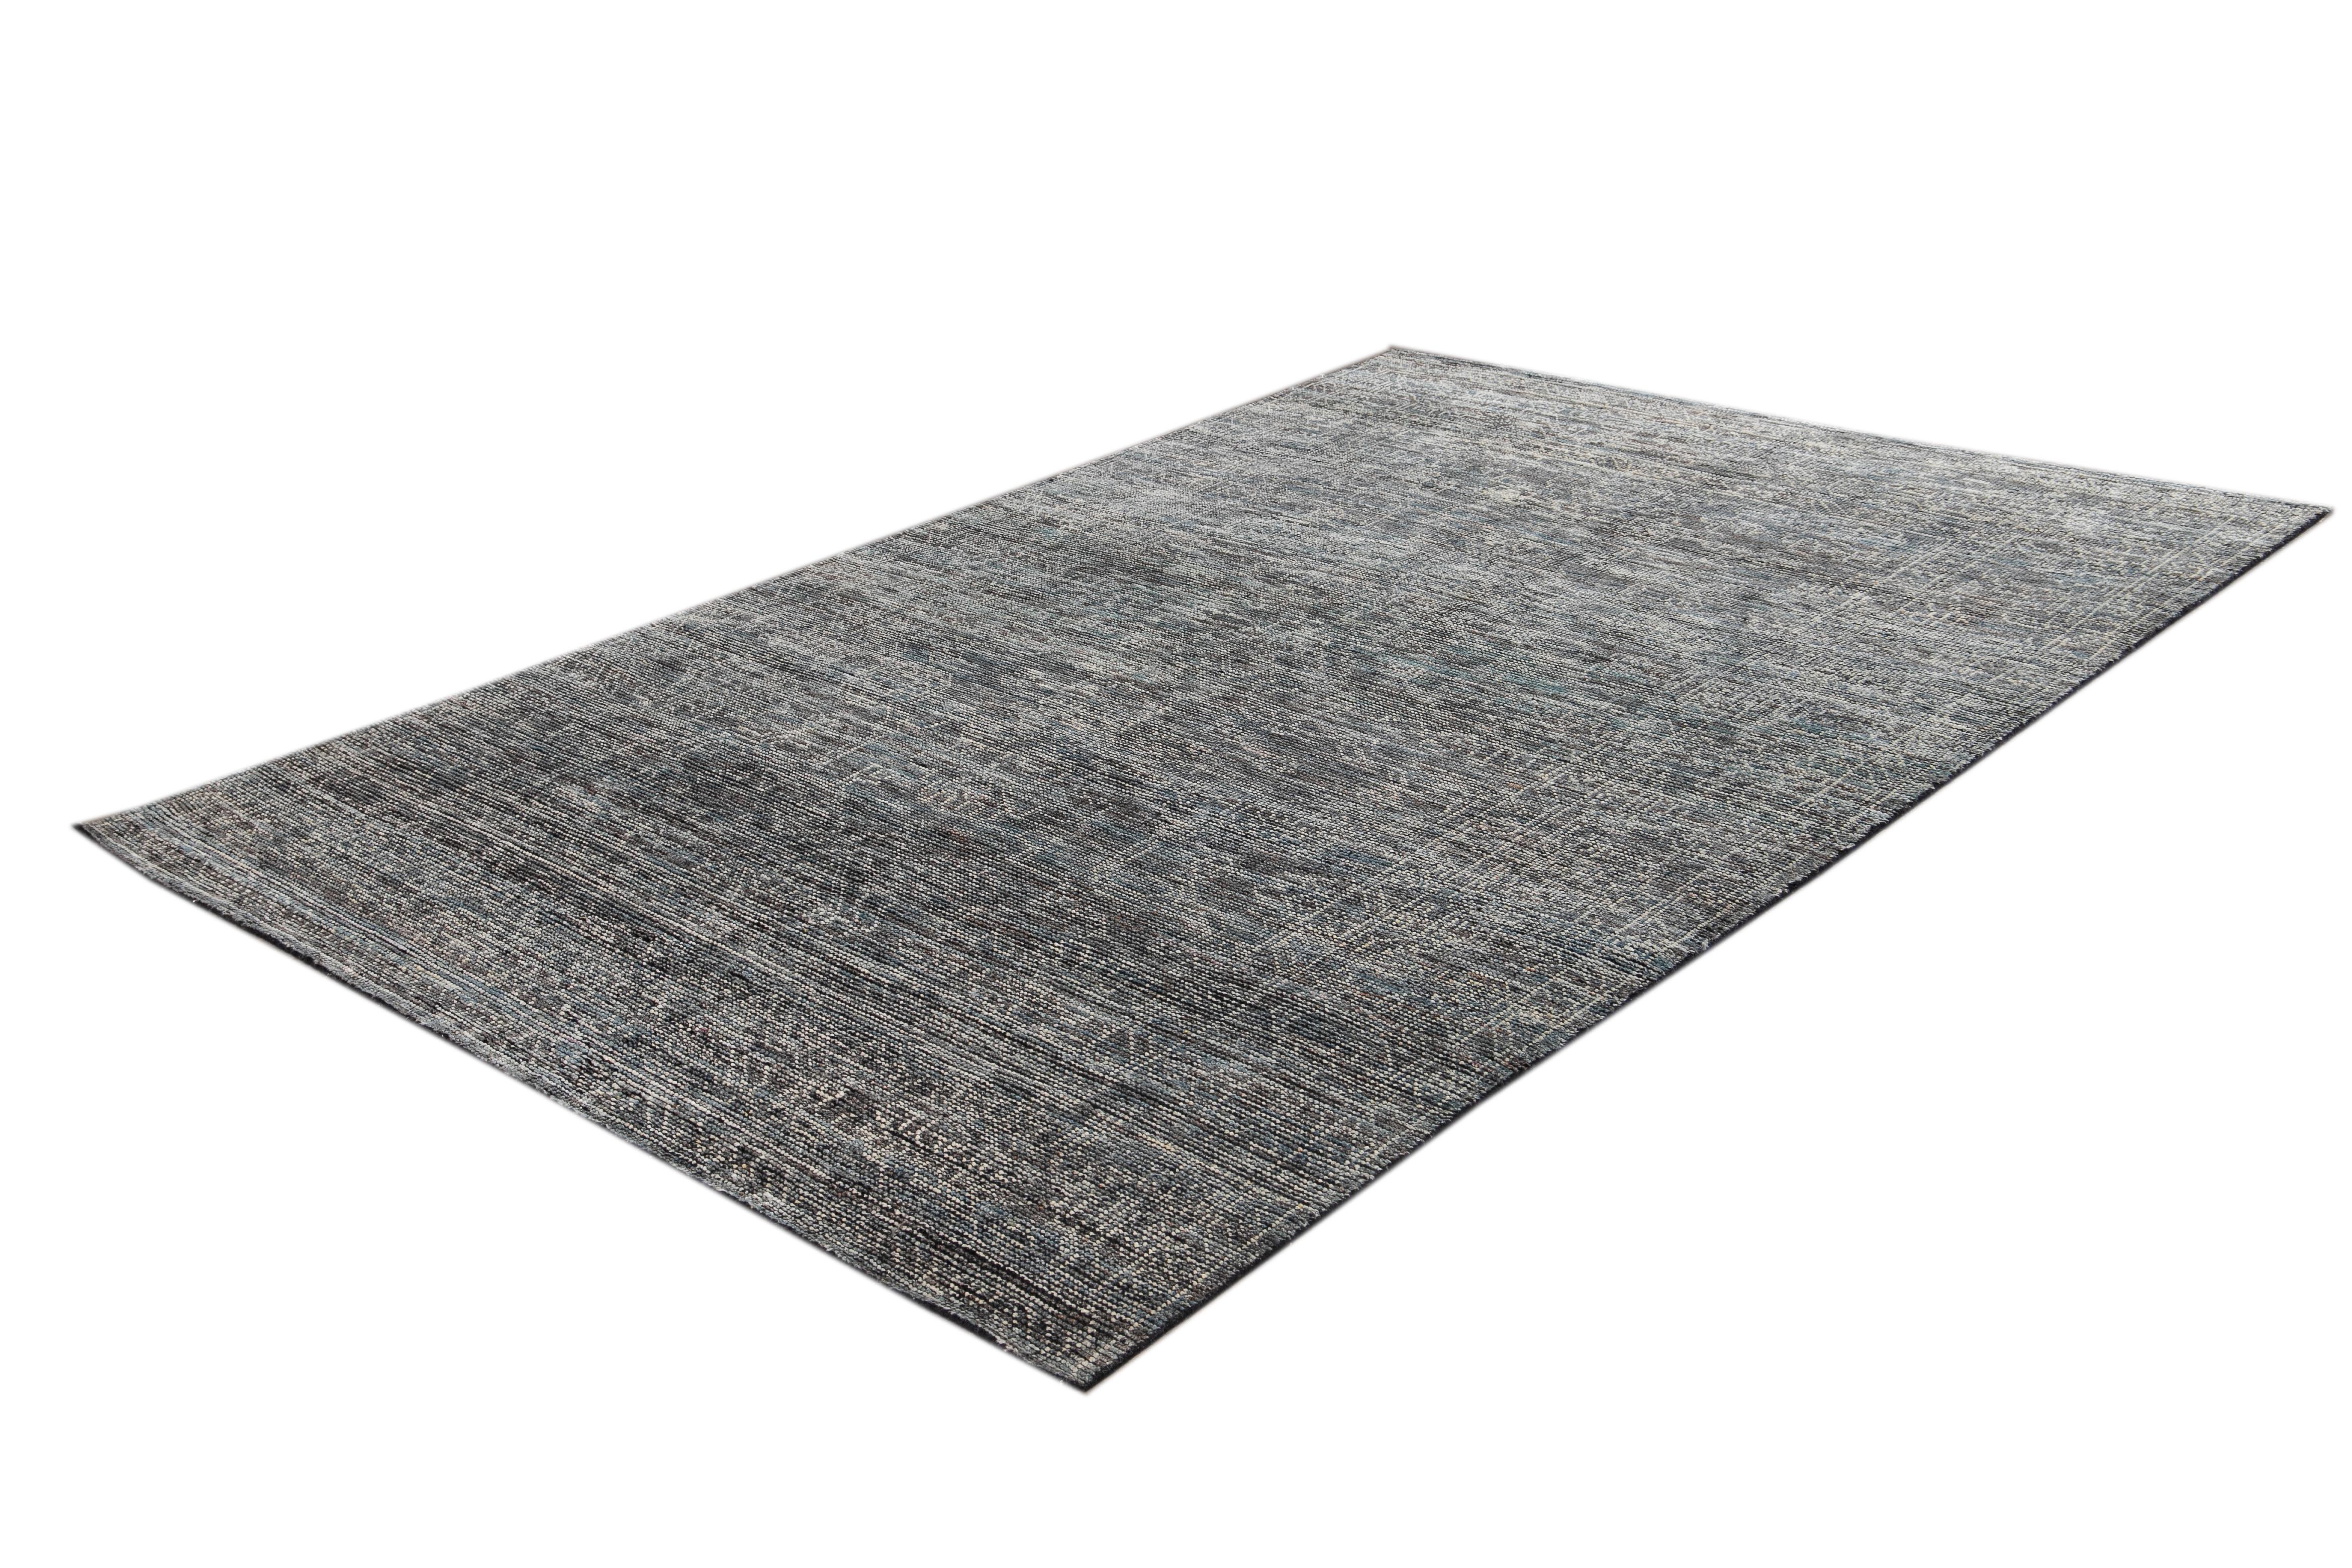 Beautiful Modern Soumak Style Distressed Indian Rug, hand-knotted wool with a gray field, denim and ivory highlights in a subtle allover multi medallion design.

This rug measures 6' 6